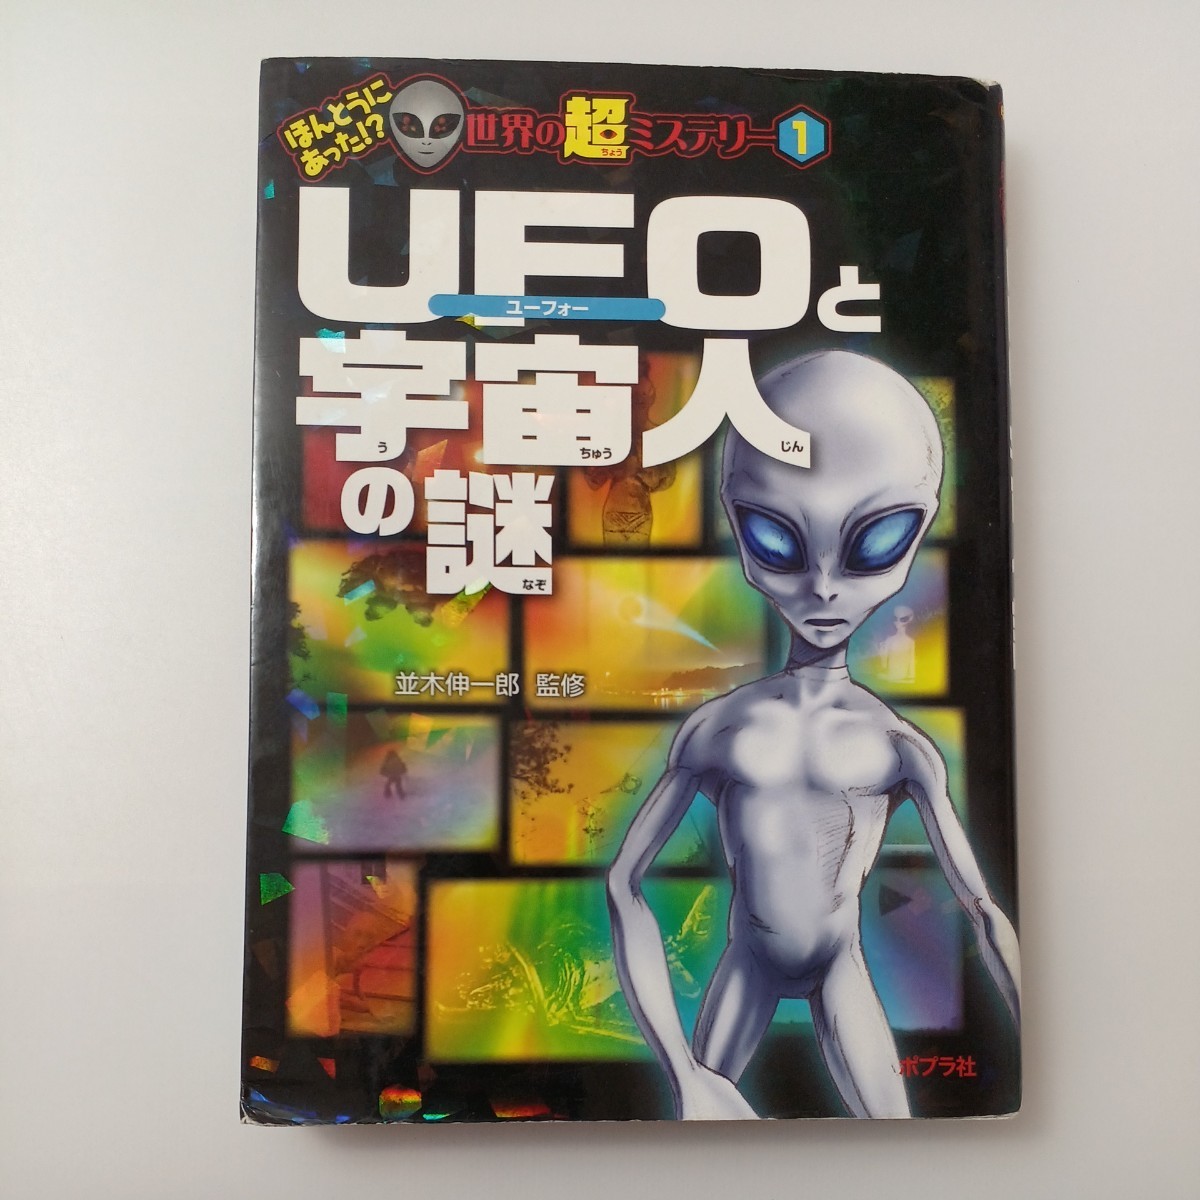 zaa-518!..... was!? world. super mystery 4 pcs. set UFO. the earth out writing Akira. mystery /UFO. extraterrestrial. mystery other 2 pcs. average tree . one .[..]